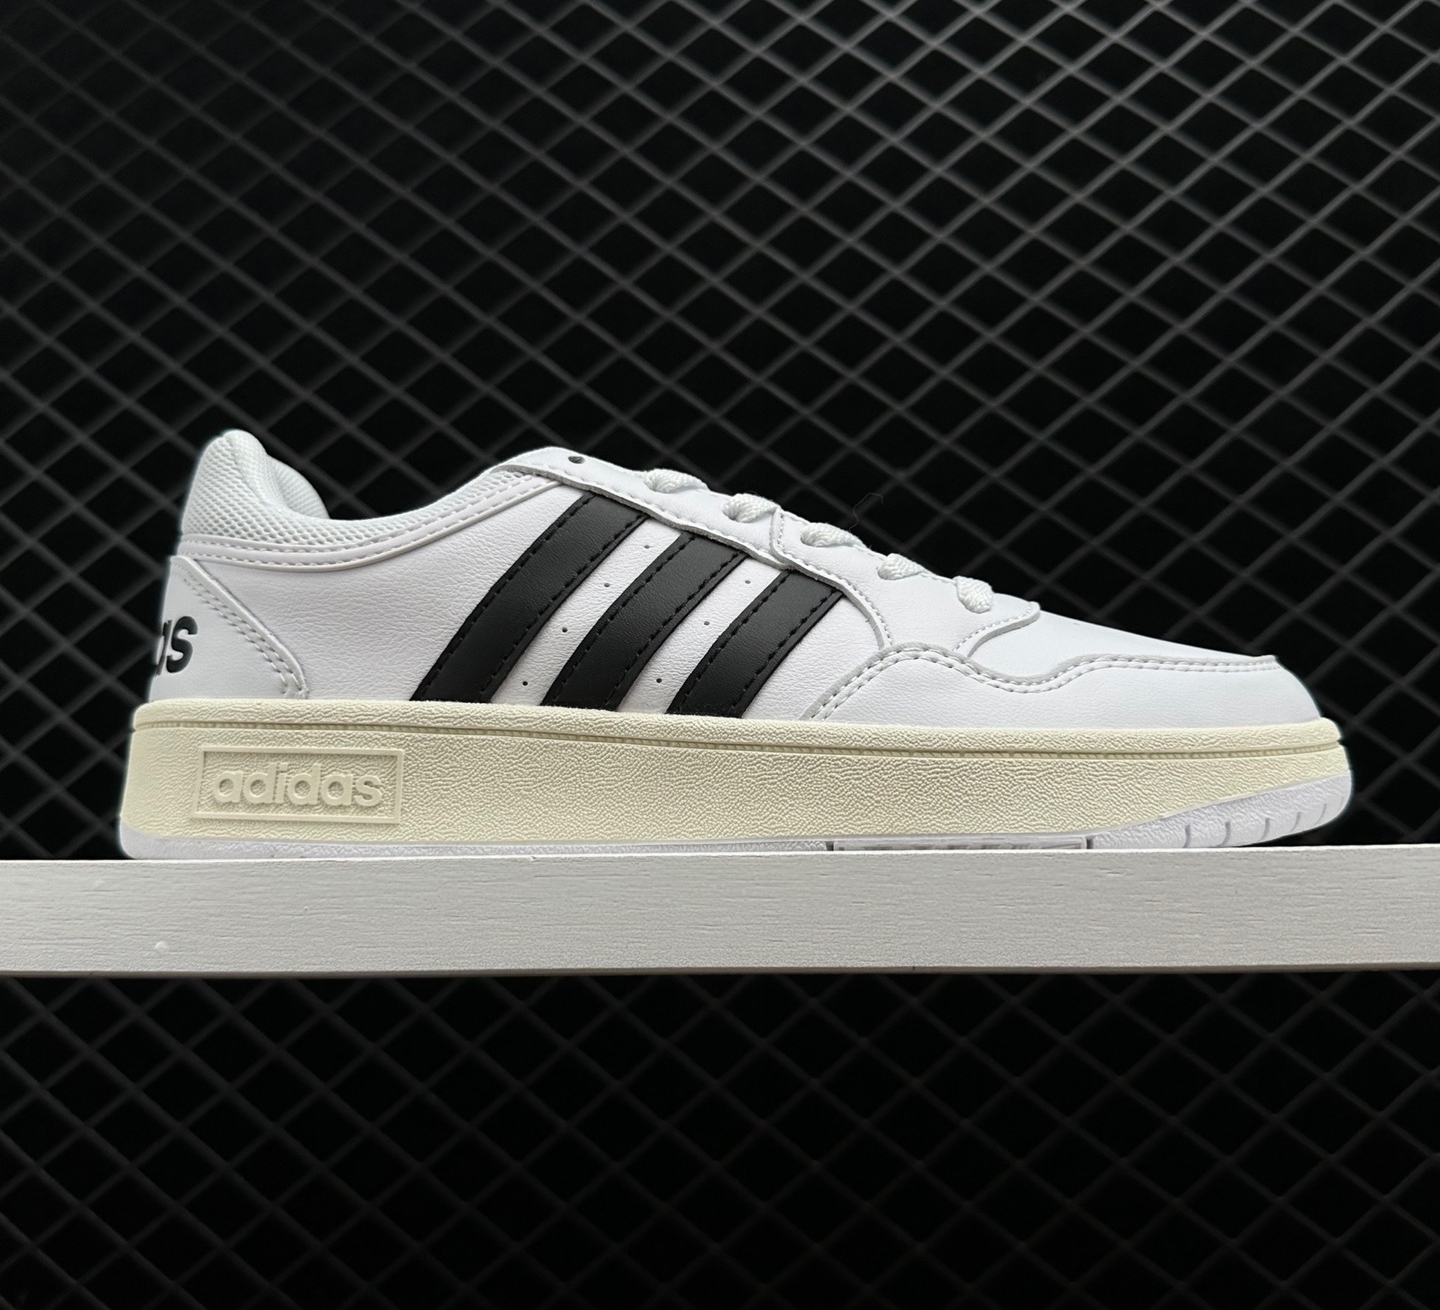 Adidas Hoops 3.0 Low Classic Vintage Shoes White Black GY5434 | Authentic Retro Sneakers